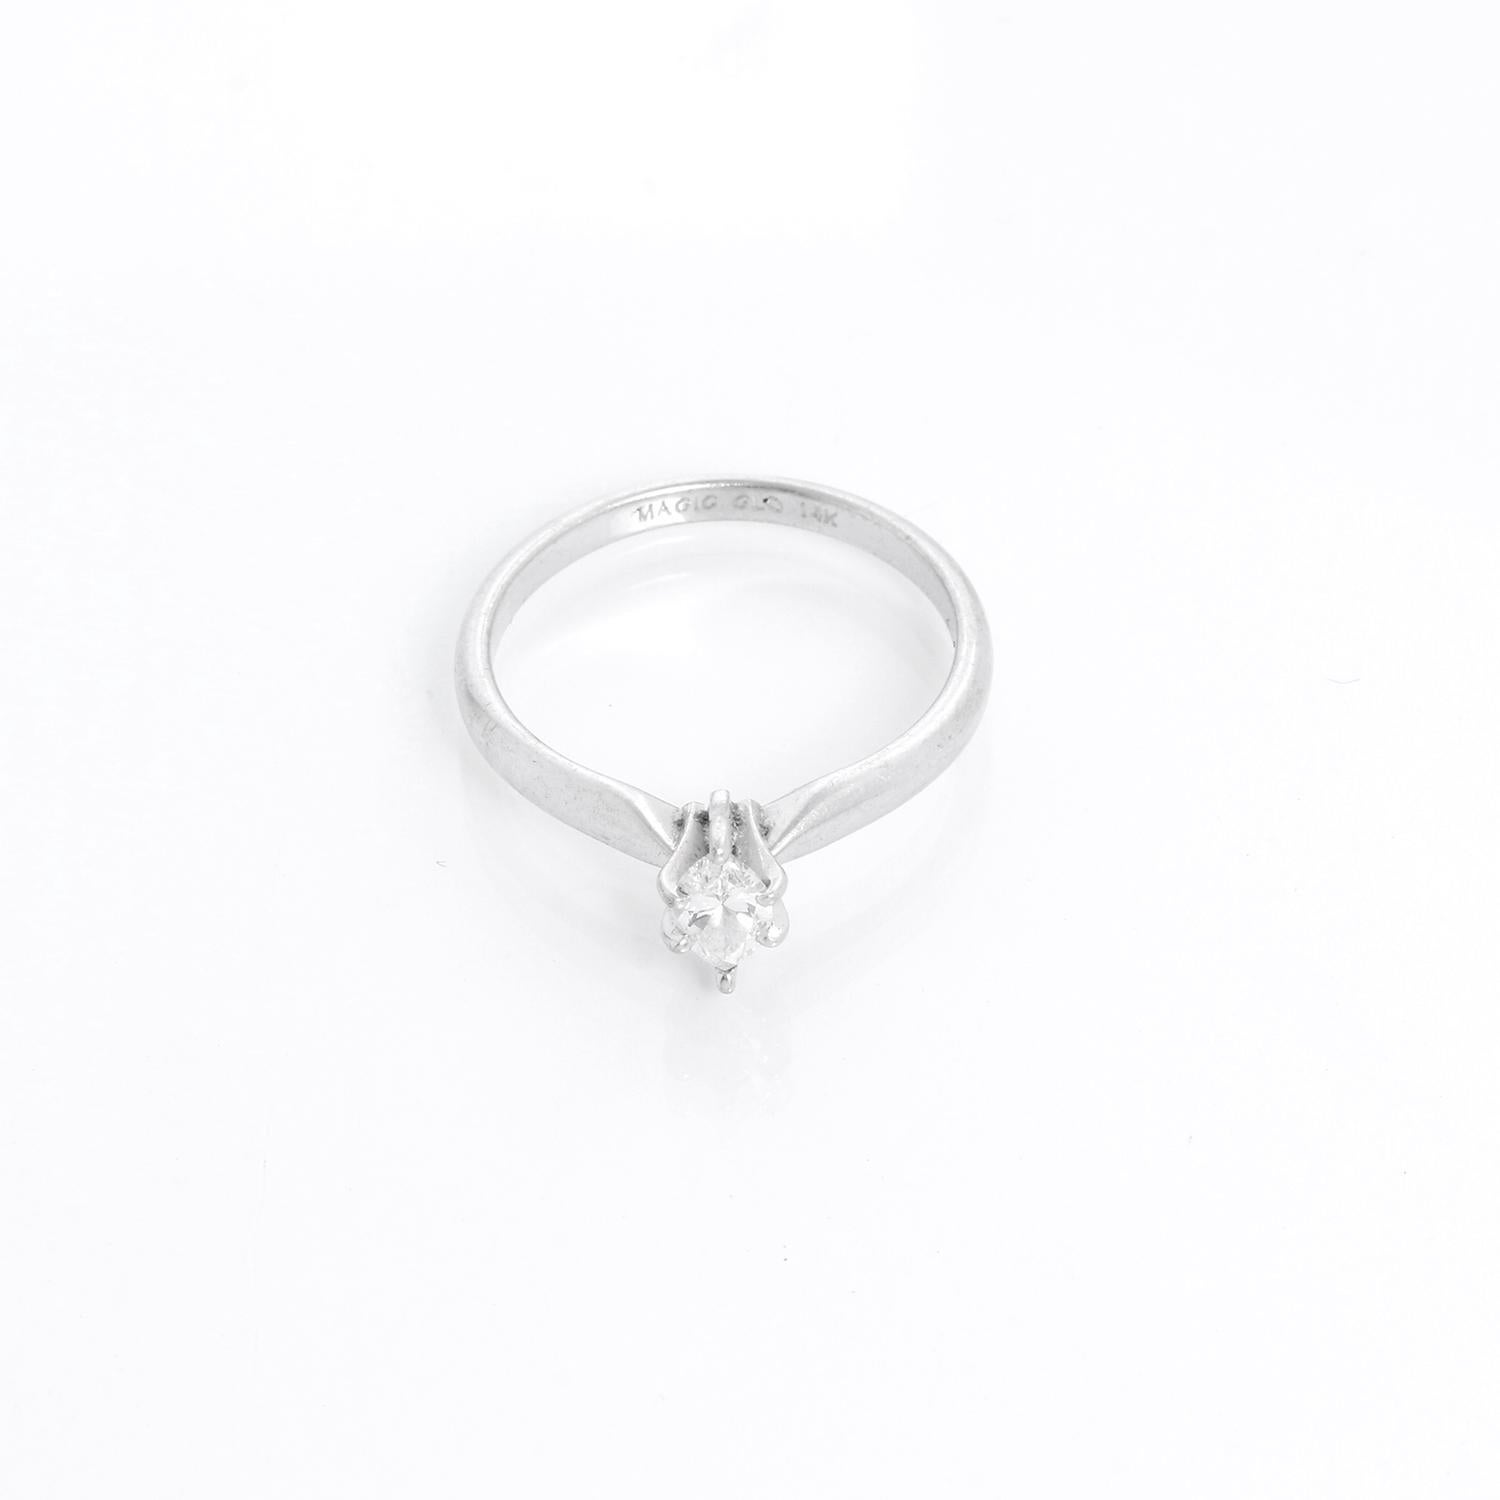 14K White Gold Marquise Magic Glo Kay Engagement Ring Size 7  - 14k white gold Marquise diamond engagement ring.  Size 7. Can be sized. Measuring .26 carats.  Grade H. Clarity VS2.  MAGIC GLOW. Pre-owned with custom box.